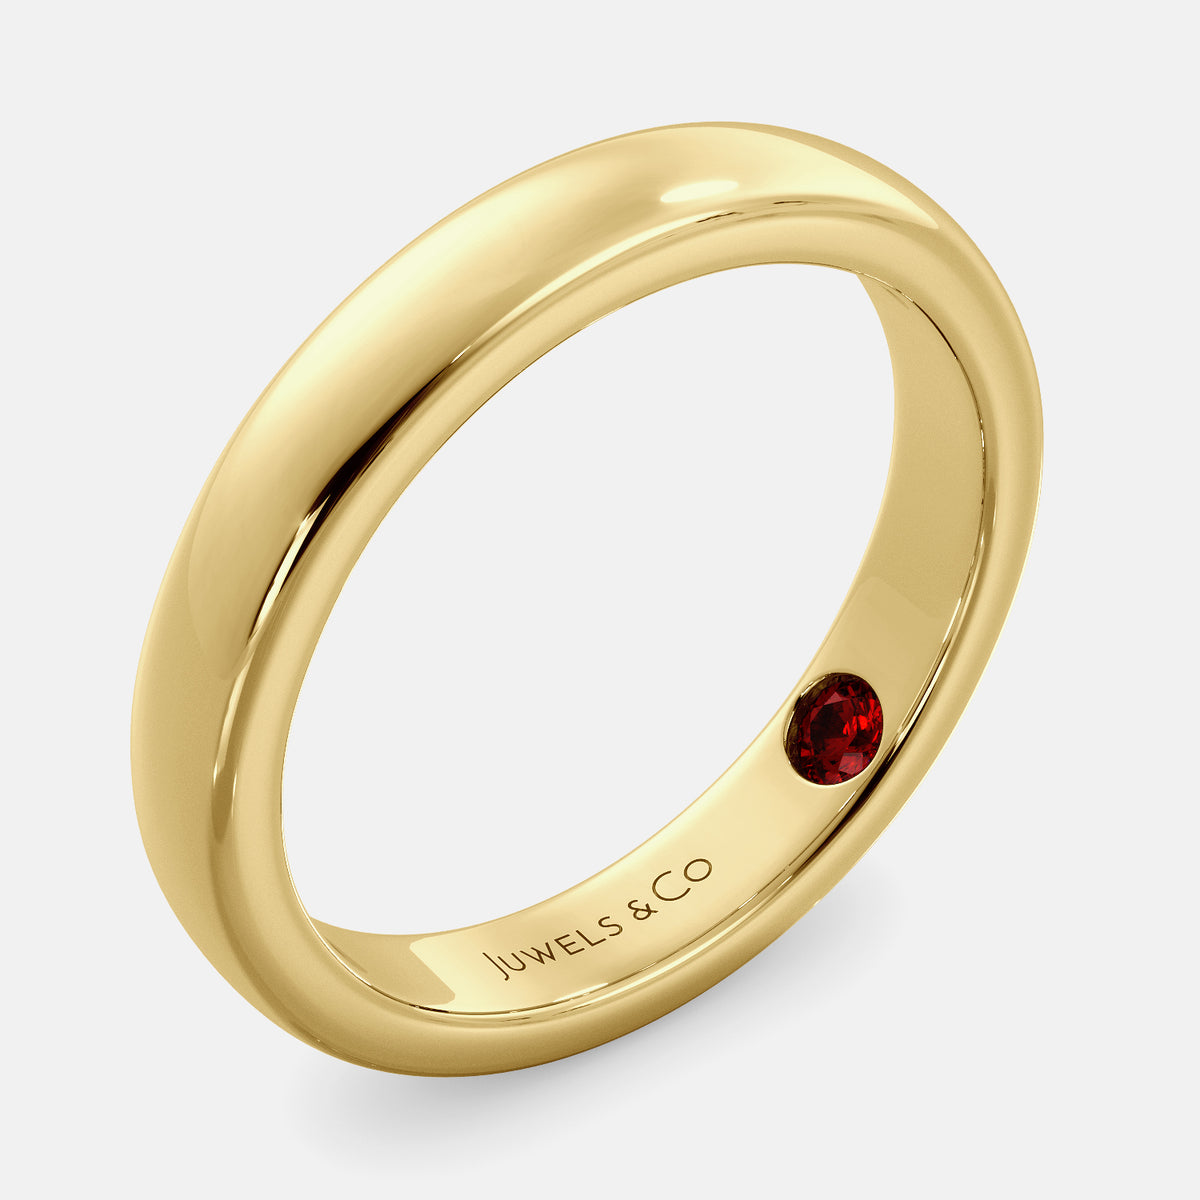 A close-up of a yellow gold flat wedding band with a hidden stone. The band is a classic and timeless design that is perfect for any occasion. The hidden stone can be customized with one of 12 different gemstones, including diamonds, rubies, sapphires, and emeralds. This makes the band a unique and personal choice for the wearer.